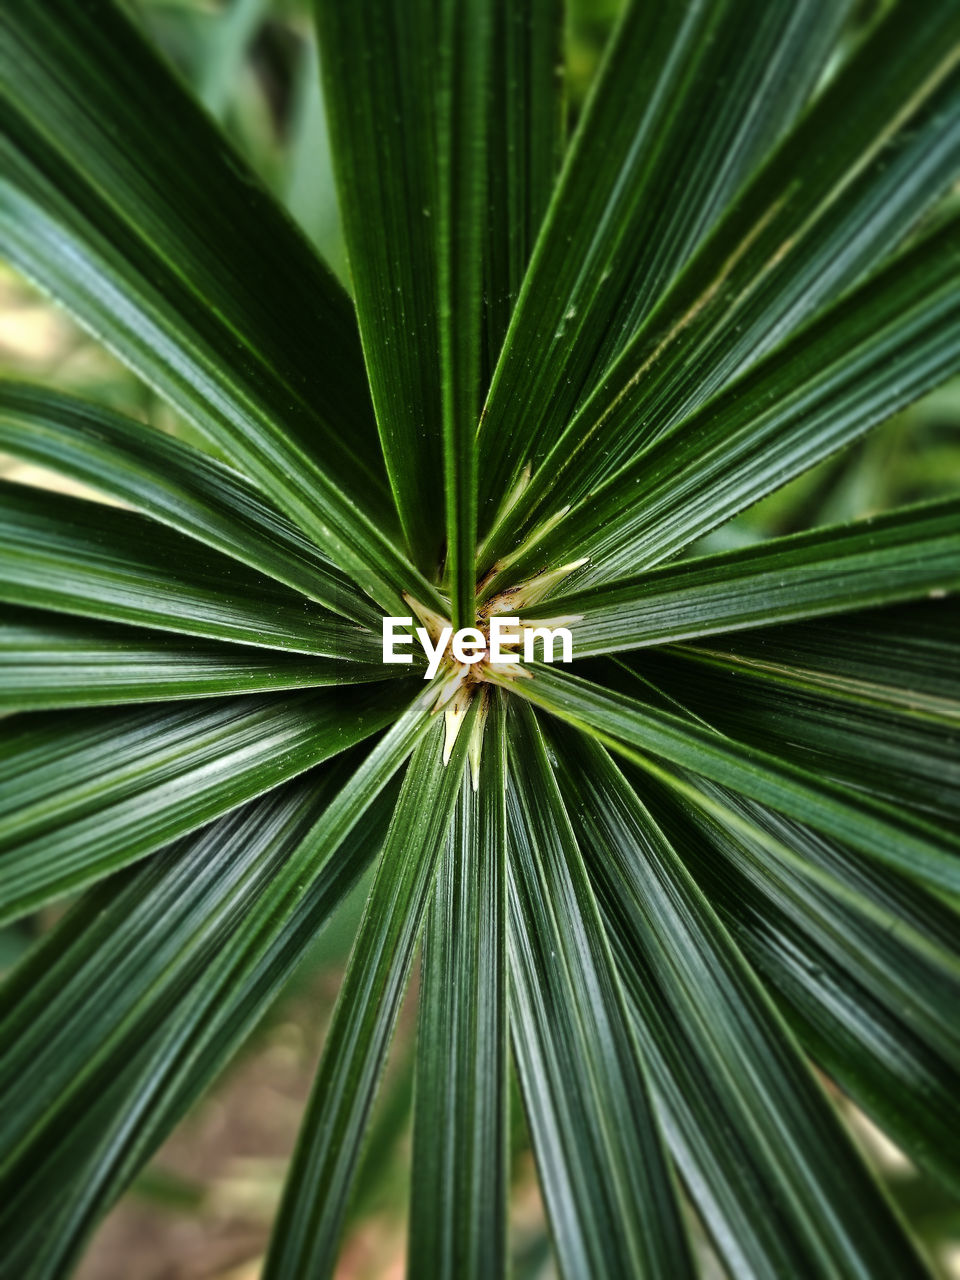 Close-up Green Color No People Full Frame Nature Outdoors Growth Day Palm Tree Tree Fragility Beauty In Nature Hello World Galaxy S8+ Smartphonephotography Leaf